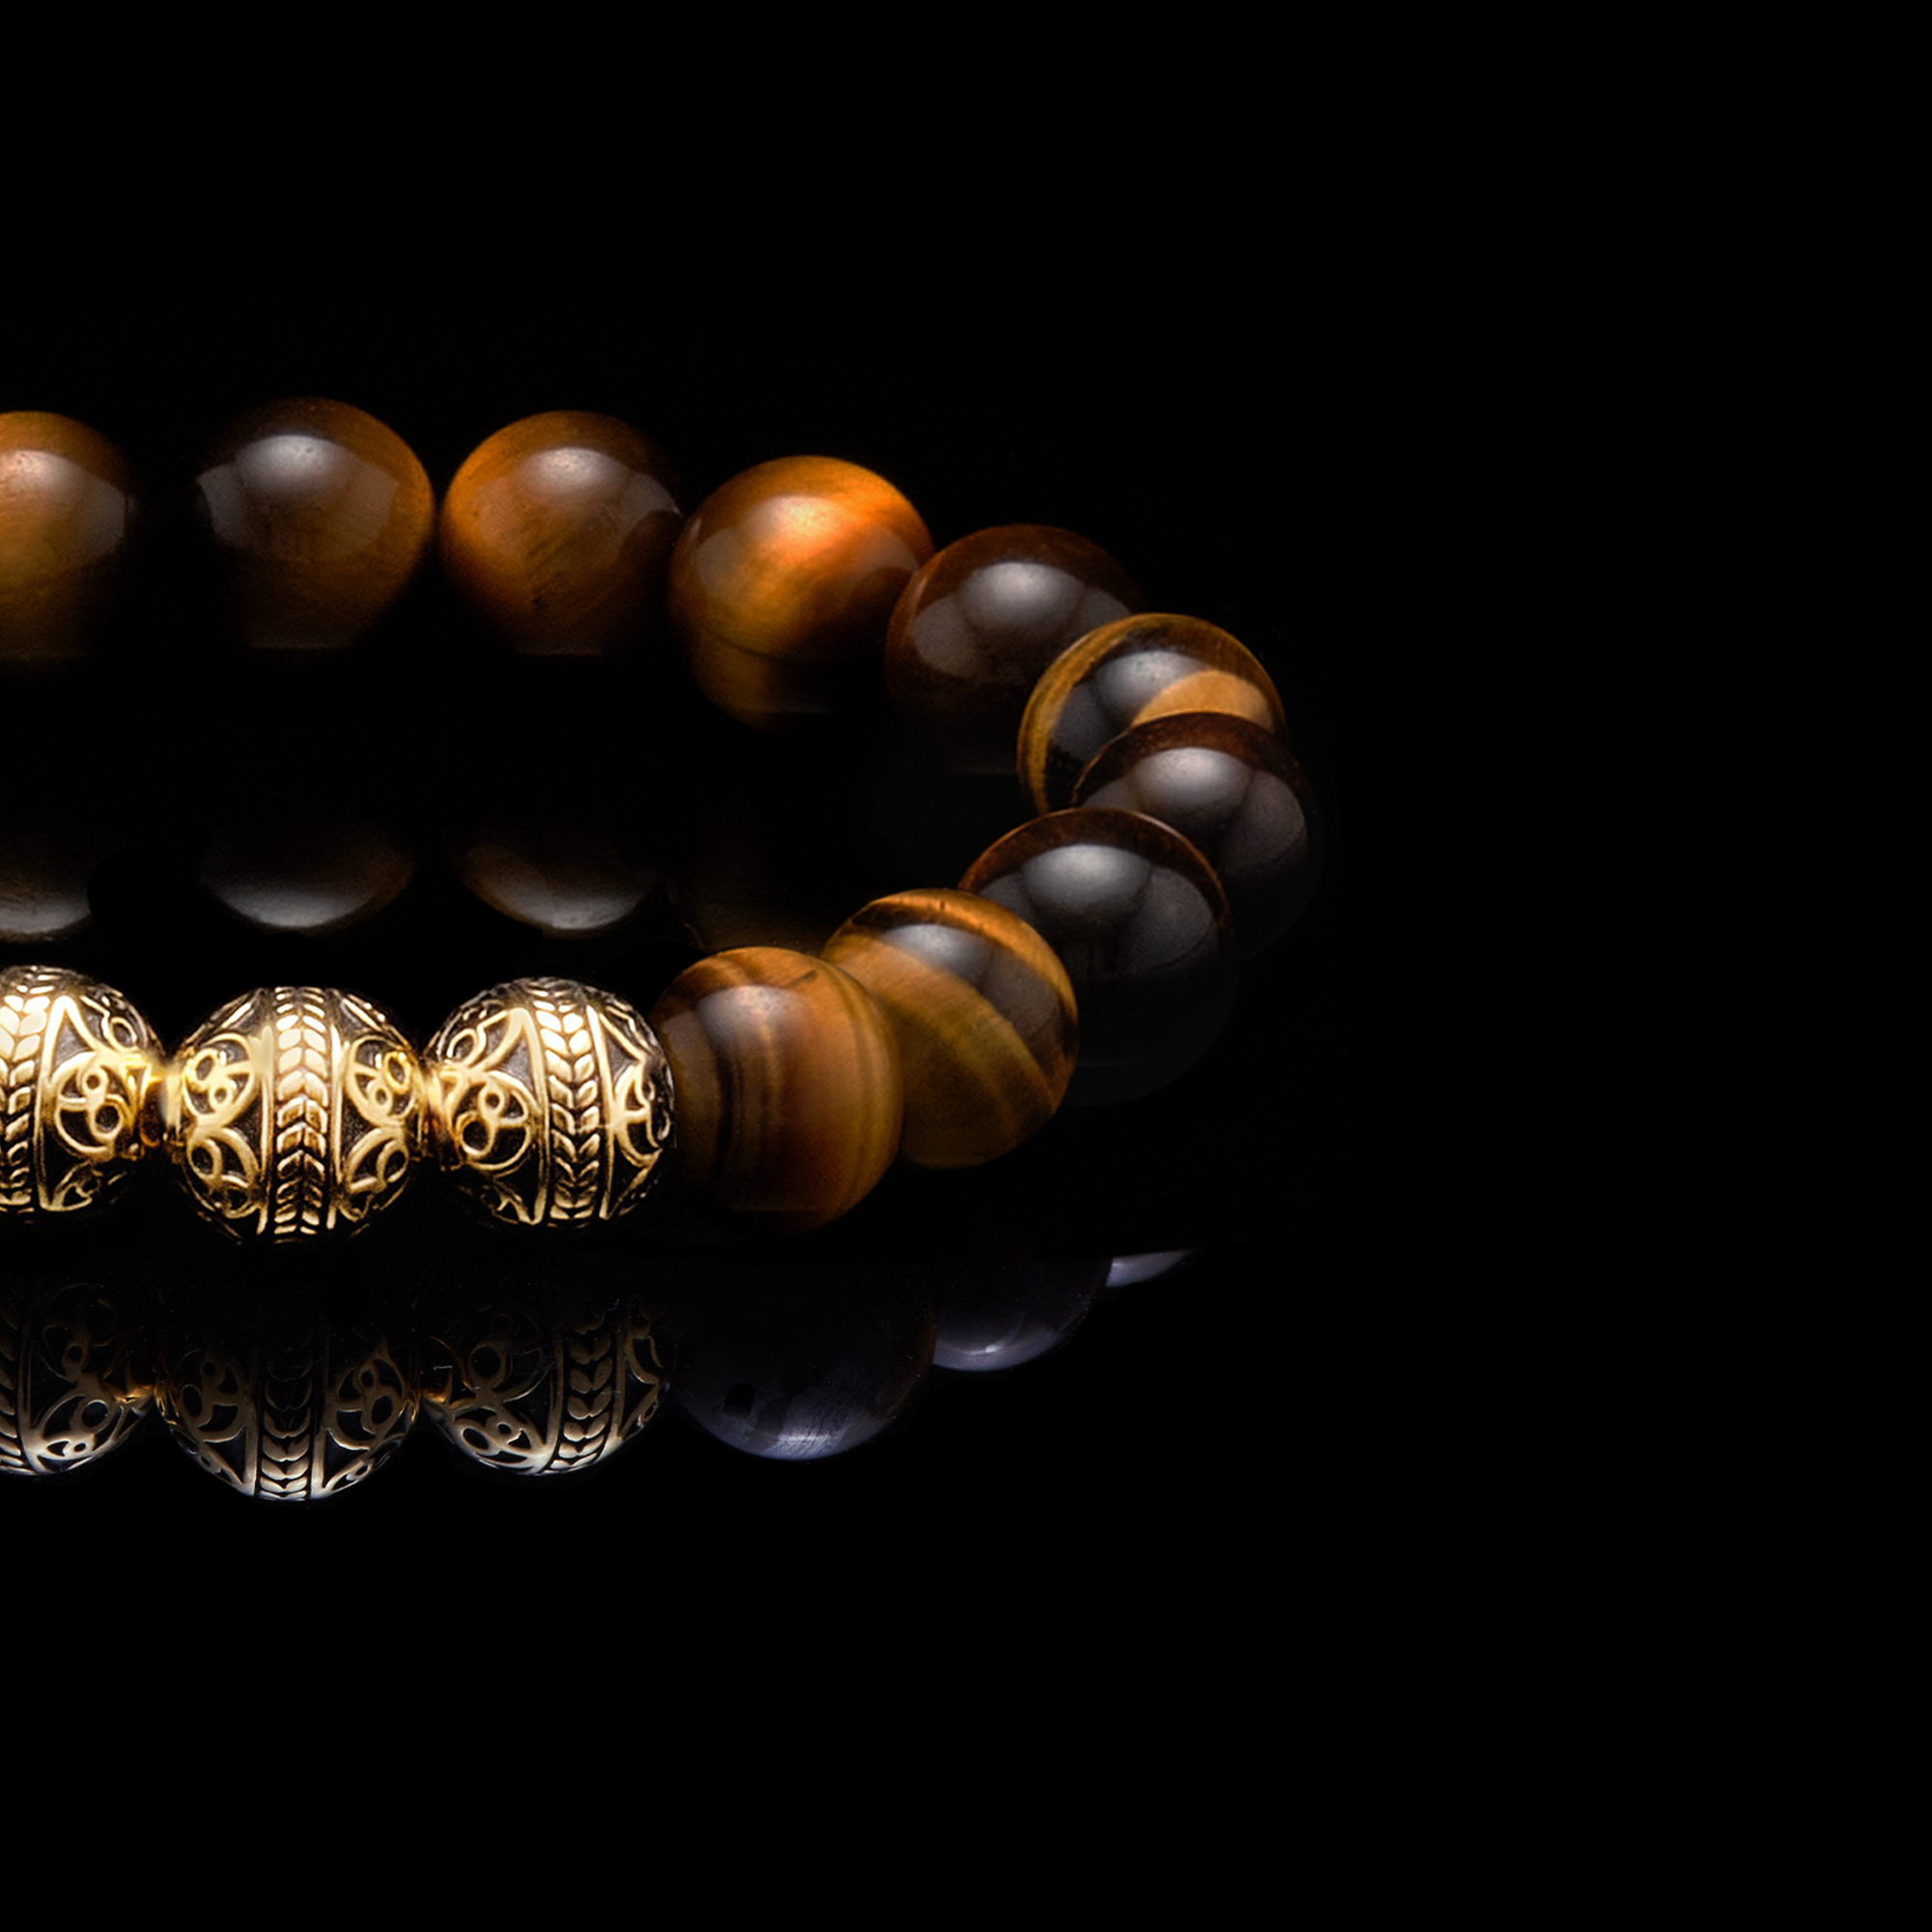 We bring you the Gold Classic Tiger Eye bracelet, a men's beaded bracelet, made for those men in leadership positions, as the tiger eye stone helps you stay centered and calm despite the ups and downs. This Tiger Eye beaded bracelet with a touch of gold is the men's beaded bracelet to have with you when there is an important decision to be made, as the tiger eye stone will balance your inner self and you will accept whatever life throws at you.